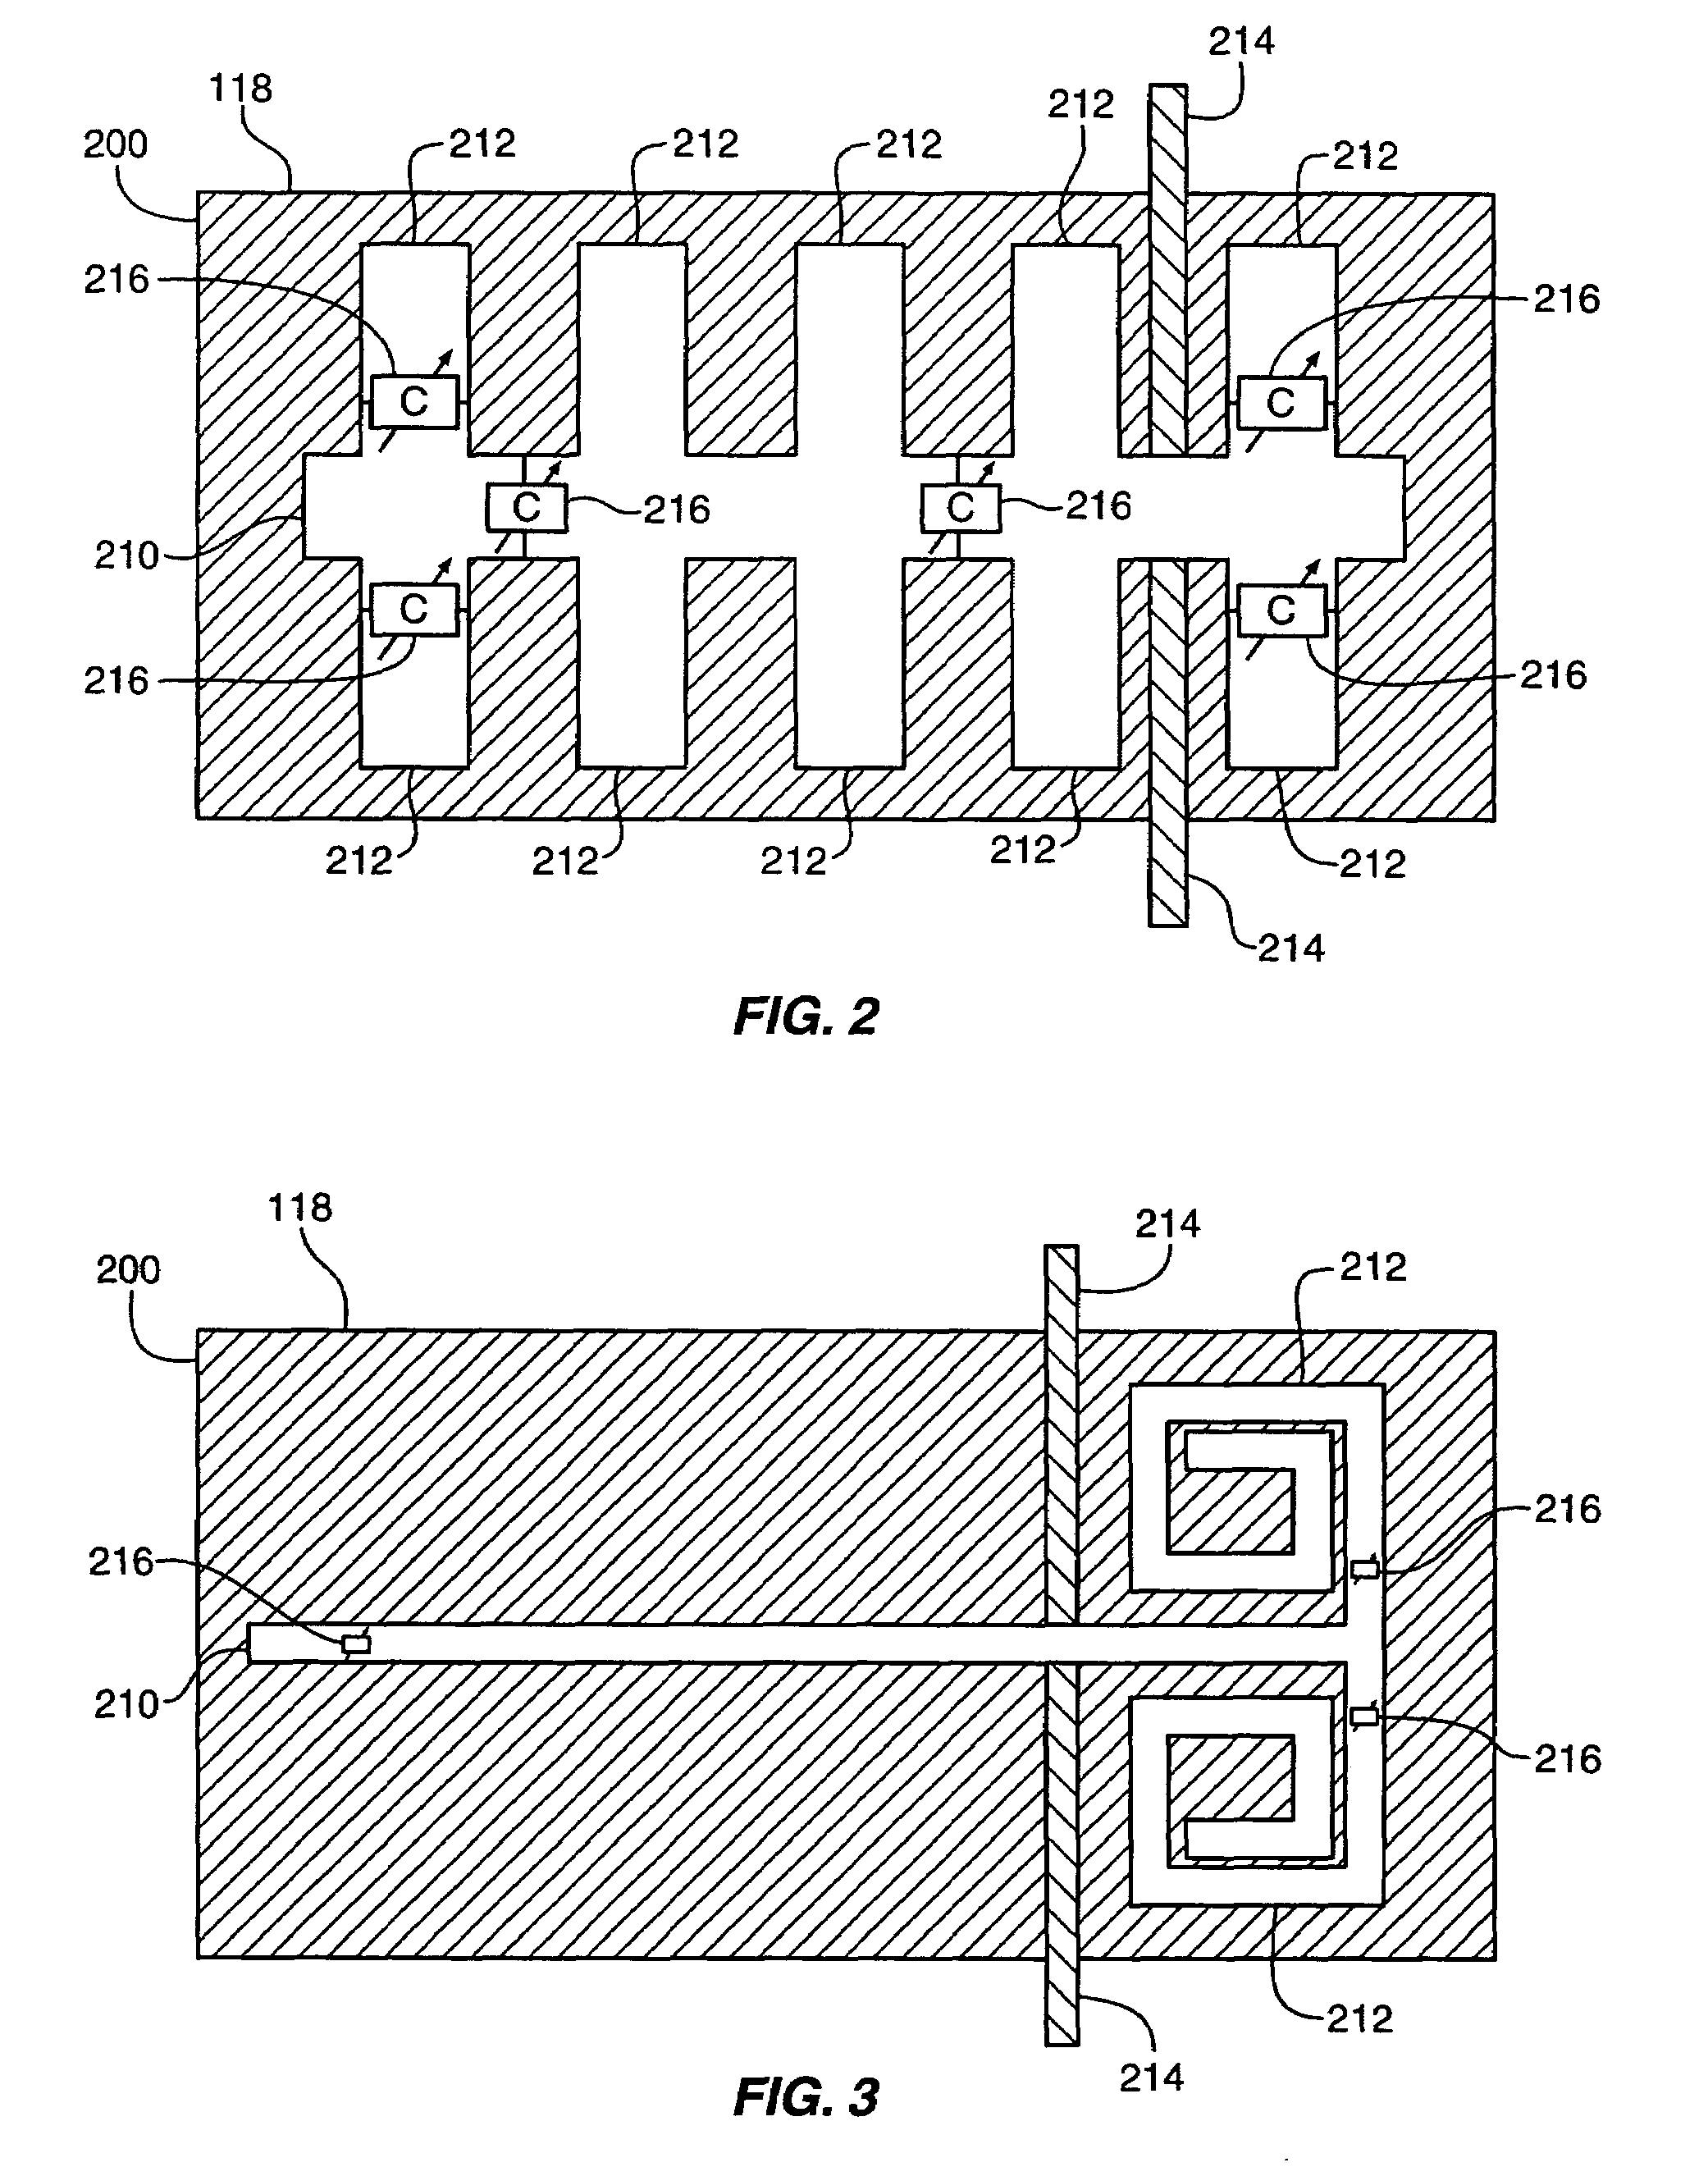 Slot antenna having a MEMS varactor for resonance frequency tuning